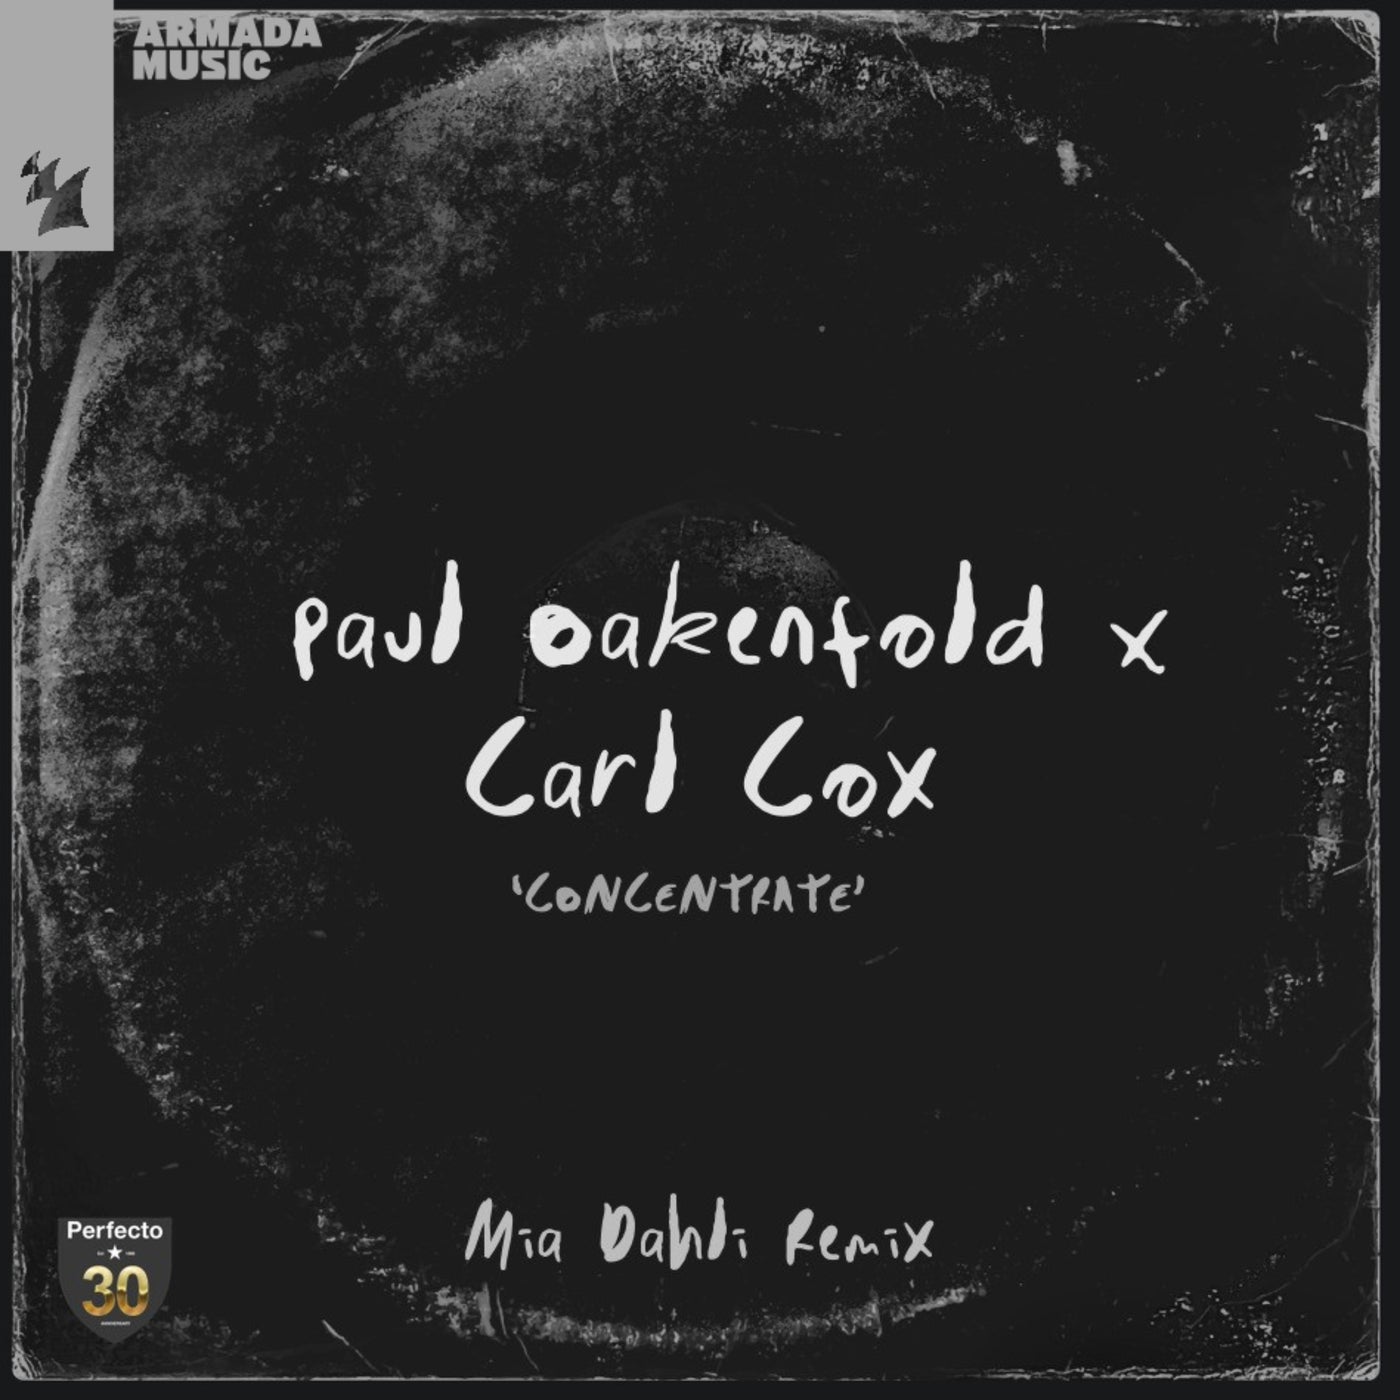 image cover: Carl Cox & Paul Oakenfold - Concentrate - Mia Dahli Remix on Perfecto Records (Armada Music)